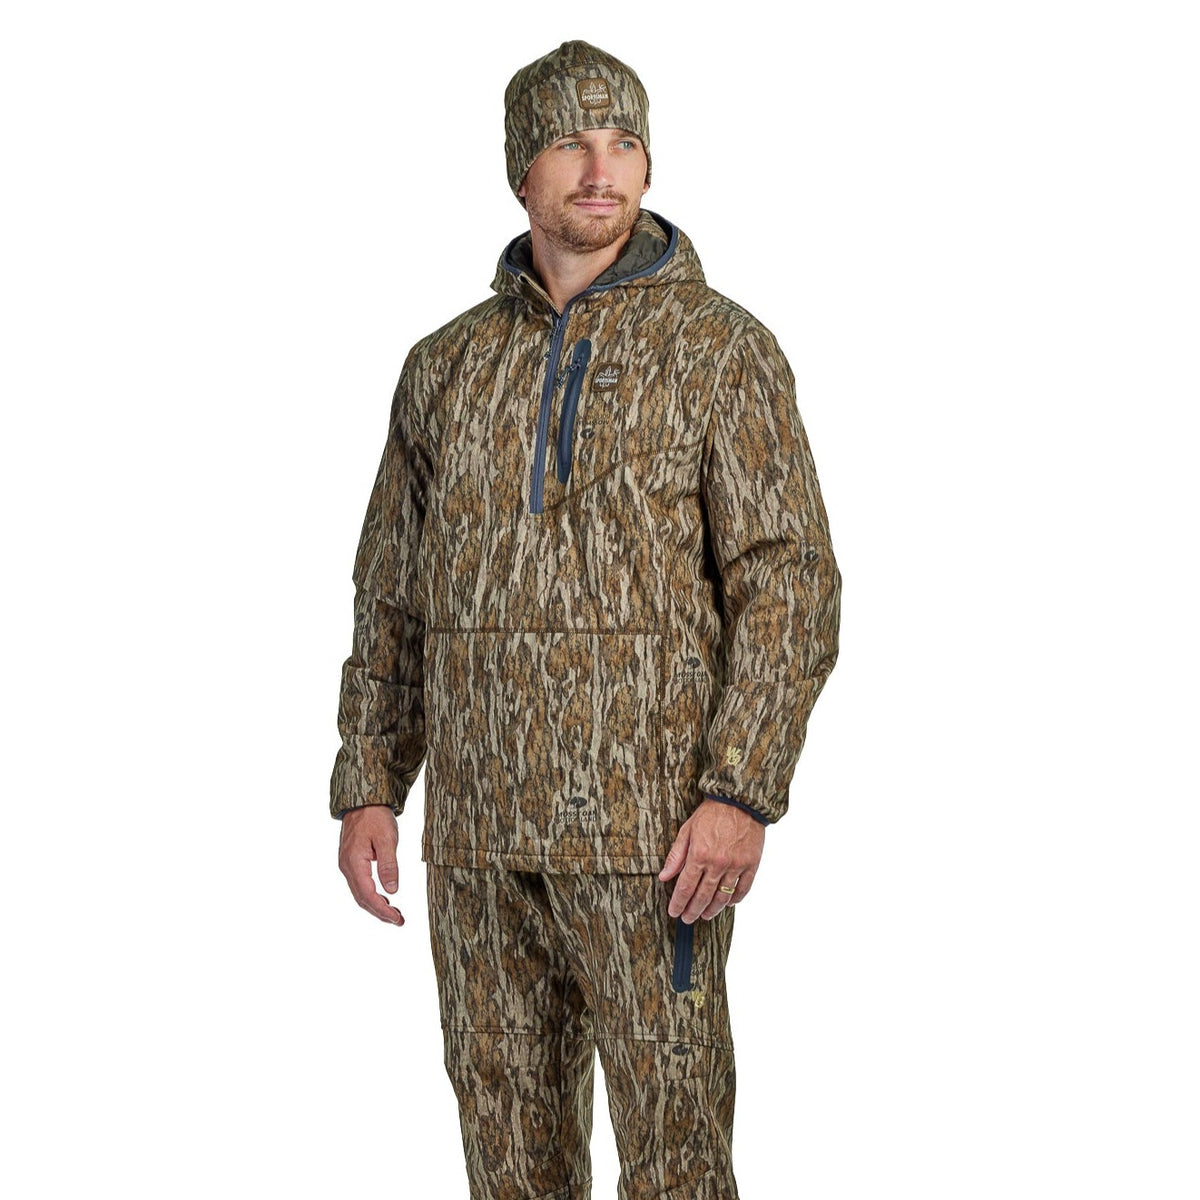 Original Outbound Hoodie: Lightweight Hunting & Fishing Hoodie with Face Mask, Gun Metal / Large